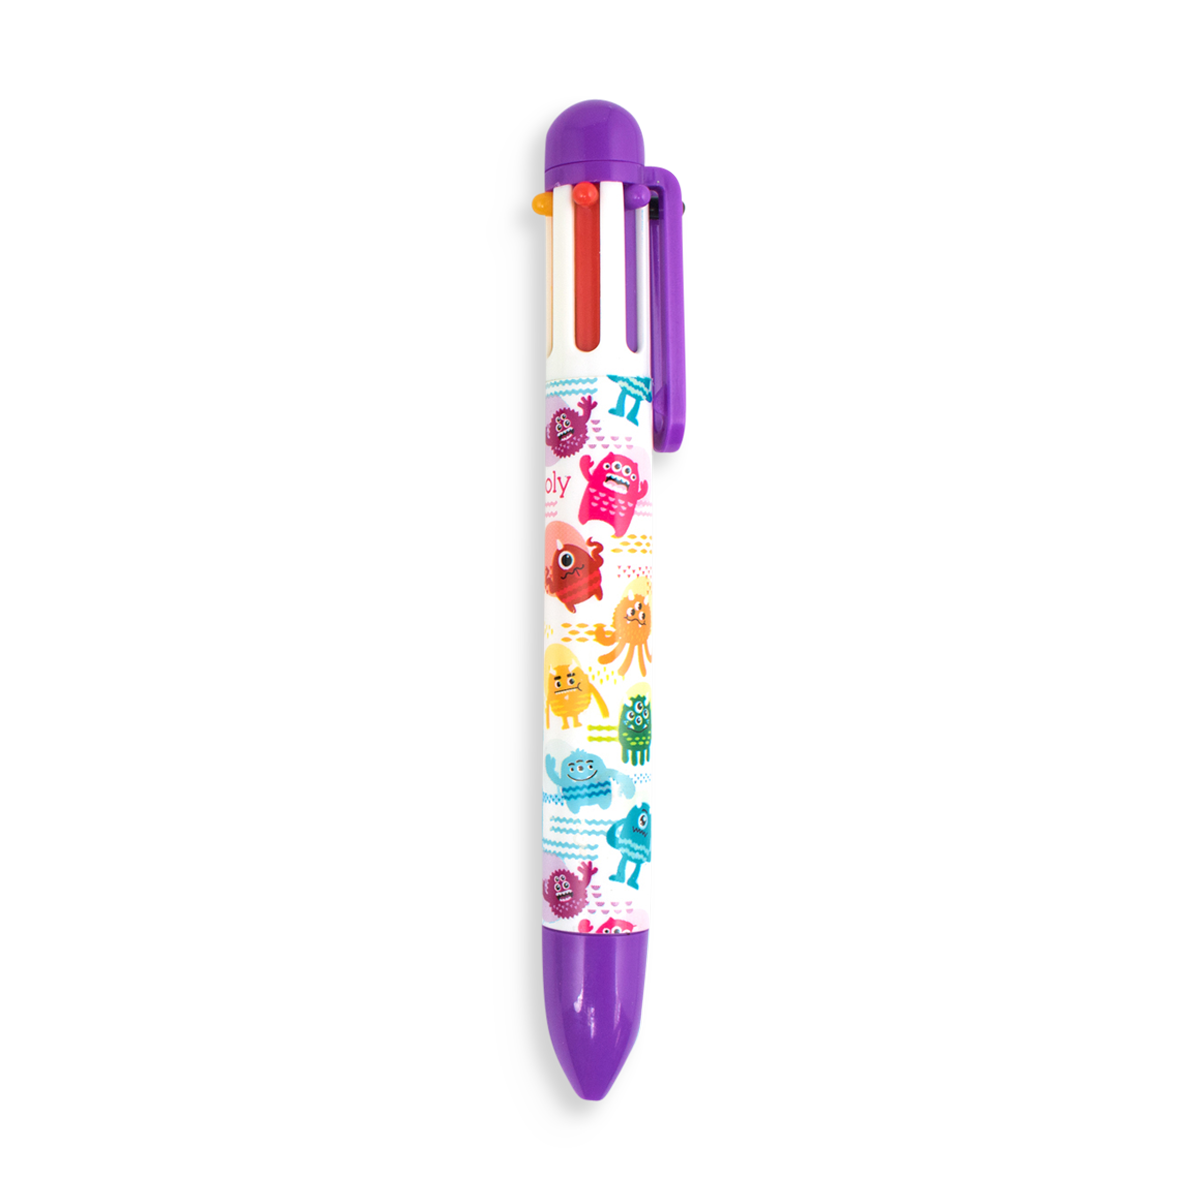 8 in 1 Retractable Pens, Multicolor Crayons 8 Colors for Kids